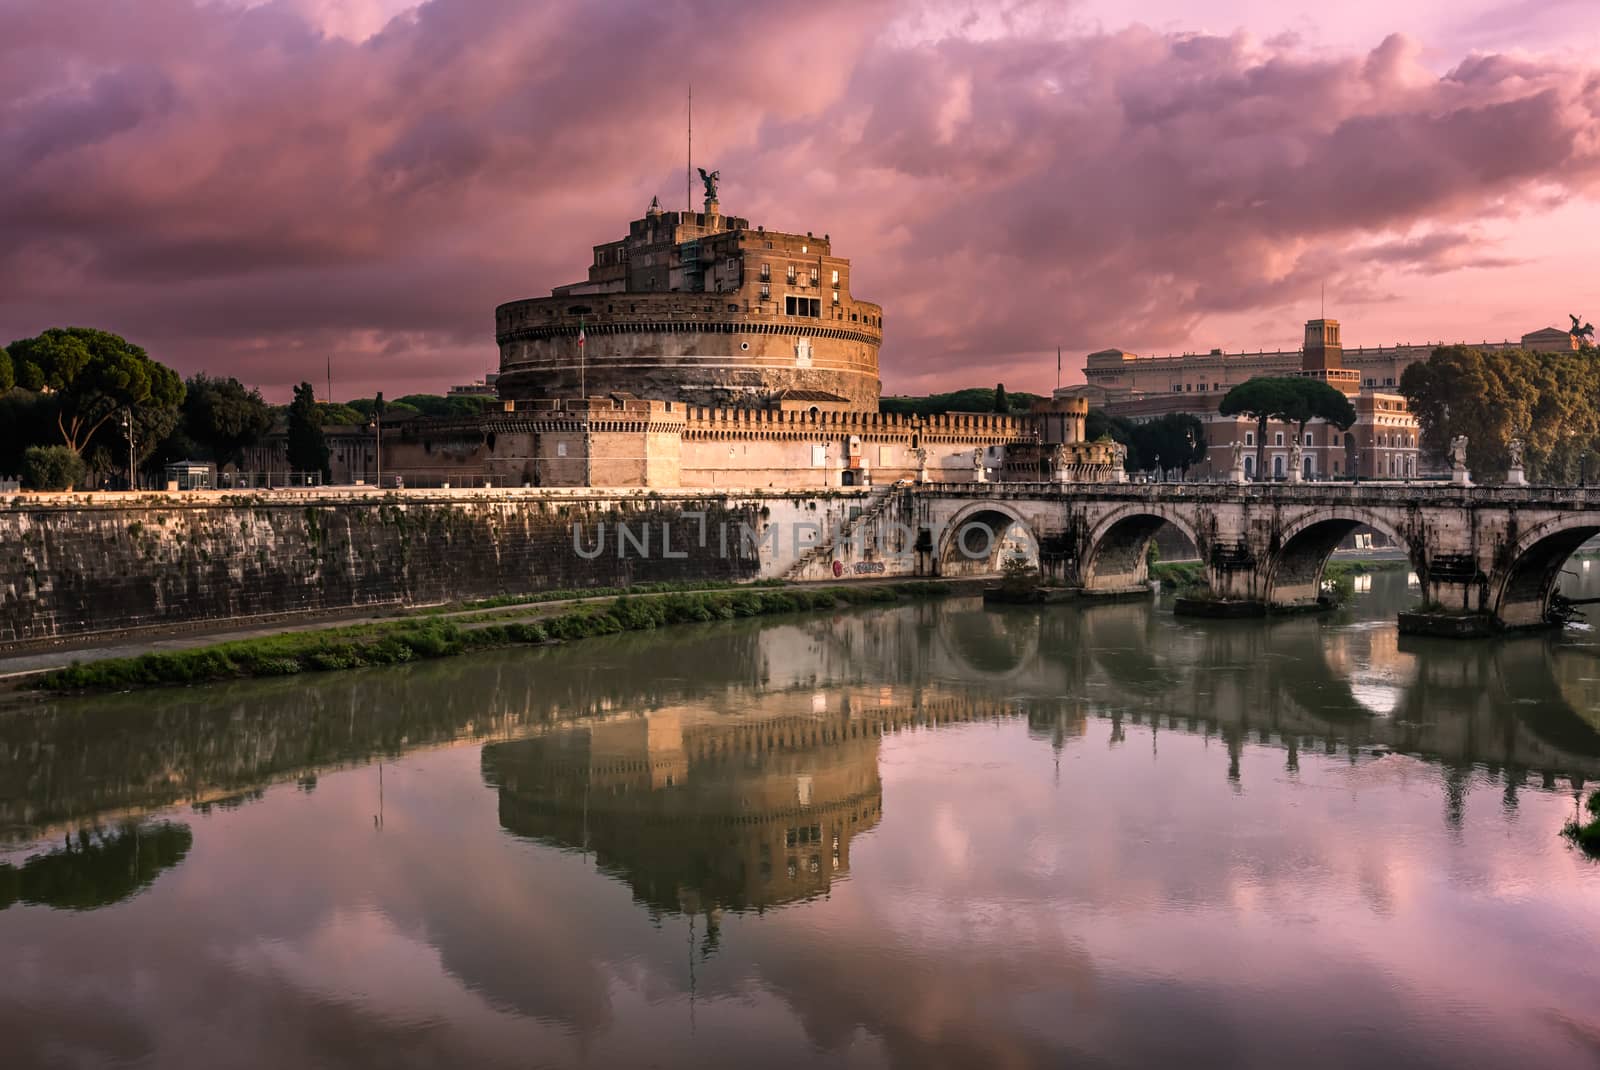 The Mausoleum of Hadrian, known as Castel Sant Angelo and the Sa by anshar